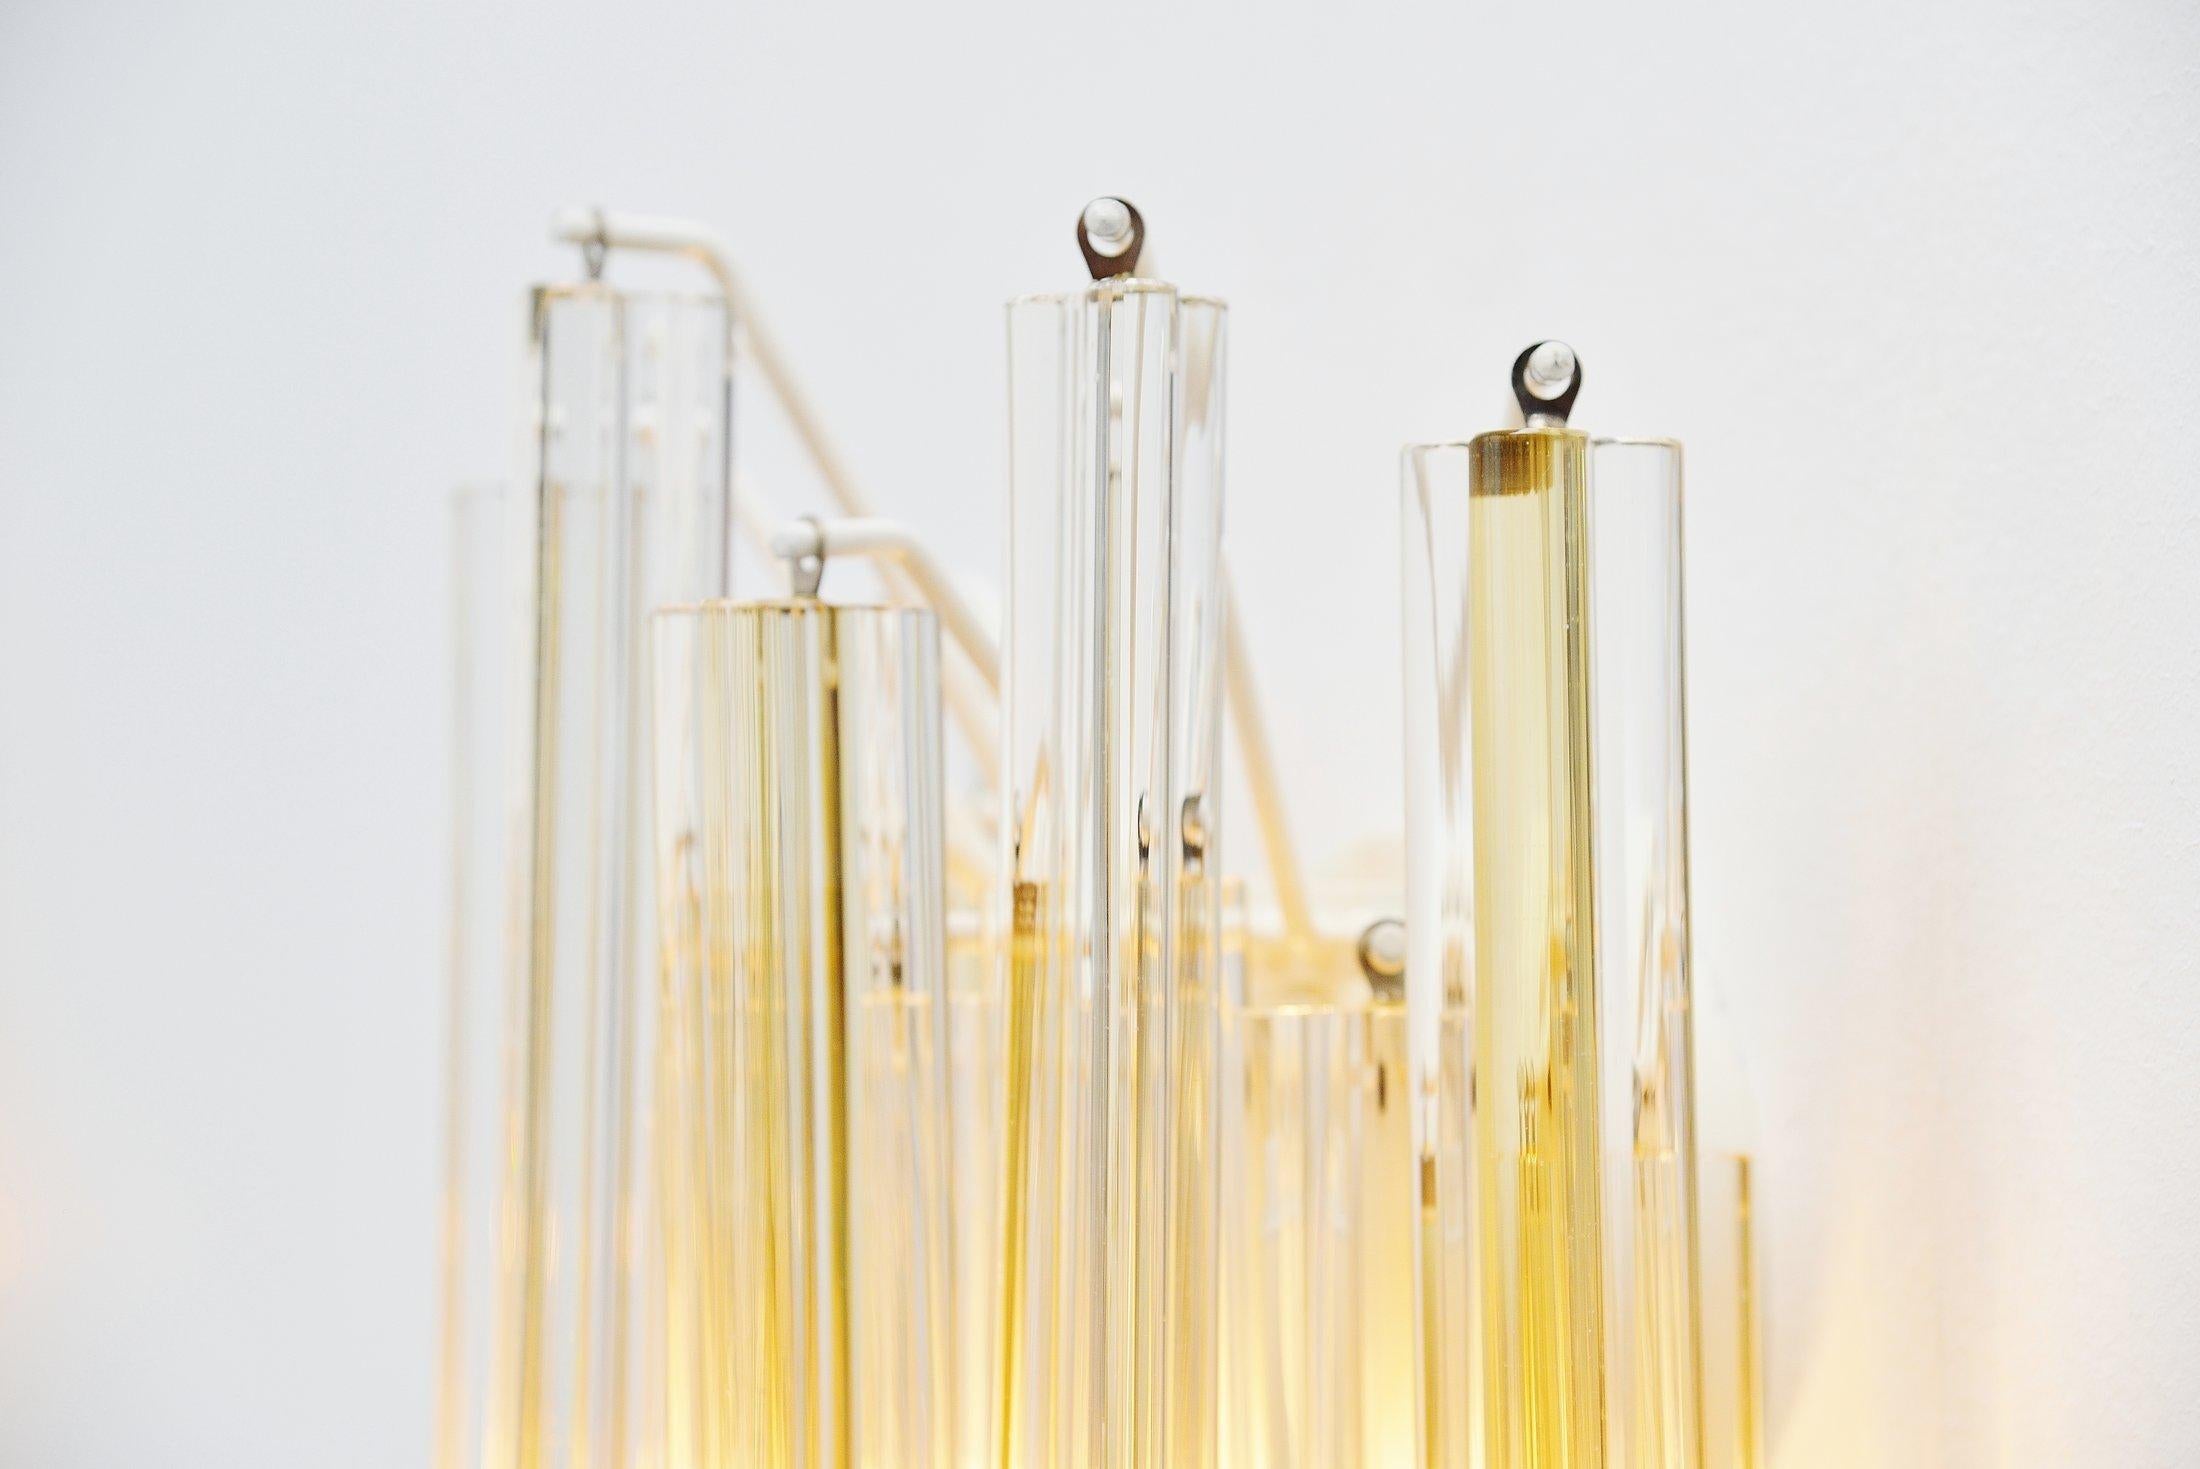 Nice pair of sconces designed by Paolo Venini, manufactured by Venini Murano, Italy, 1960. These sconces have several transparent / yellow glass pegs called asta triedo. The pegs are all in good condition and hang on a white painted wall frame. The